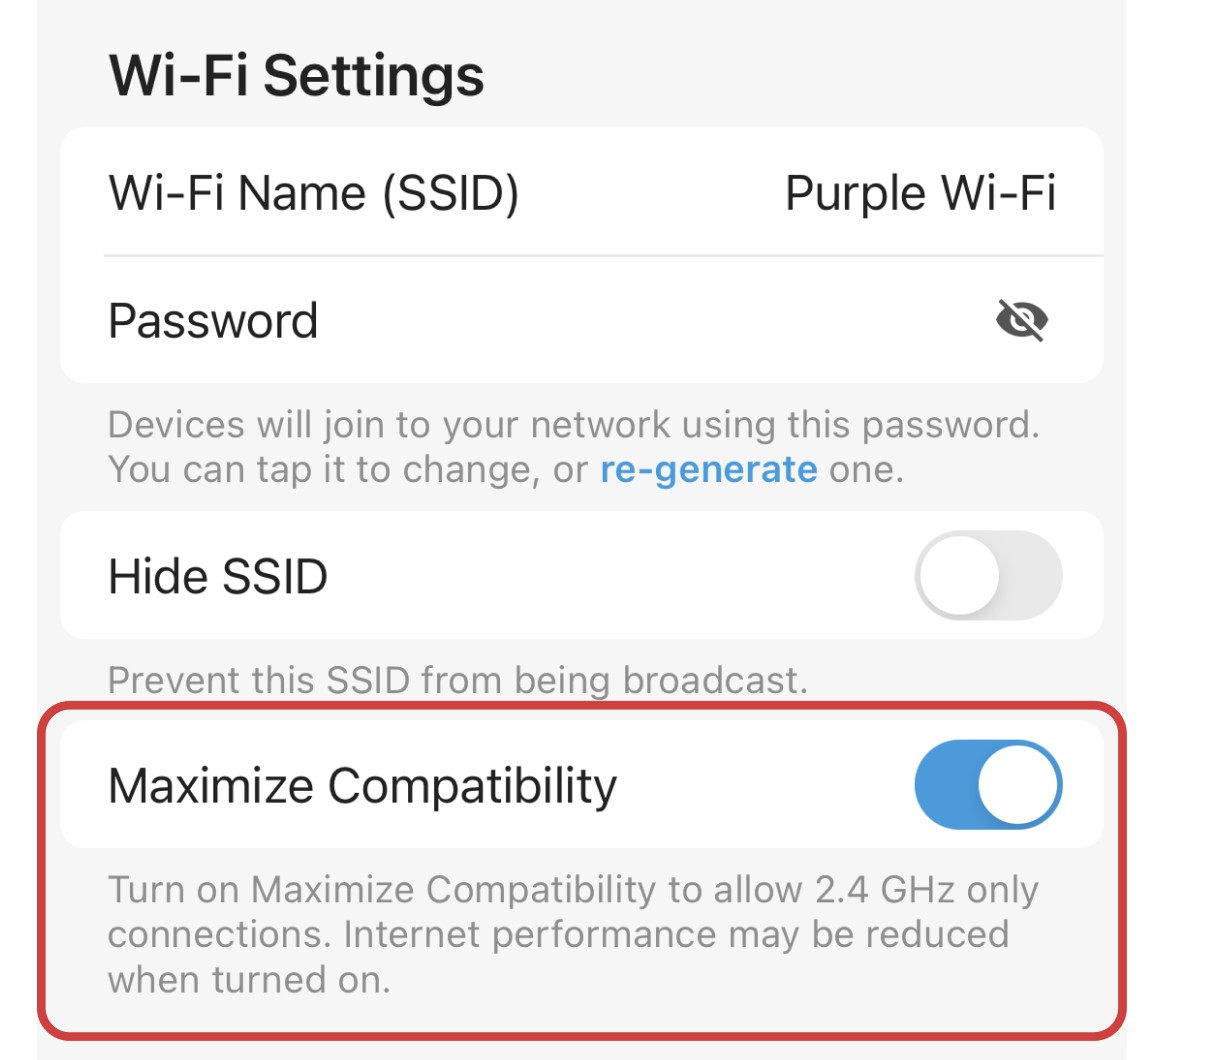 Wi-Fi advanced network settings that allow you select maximize compatibility